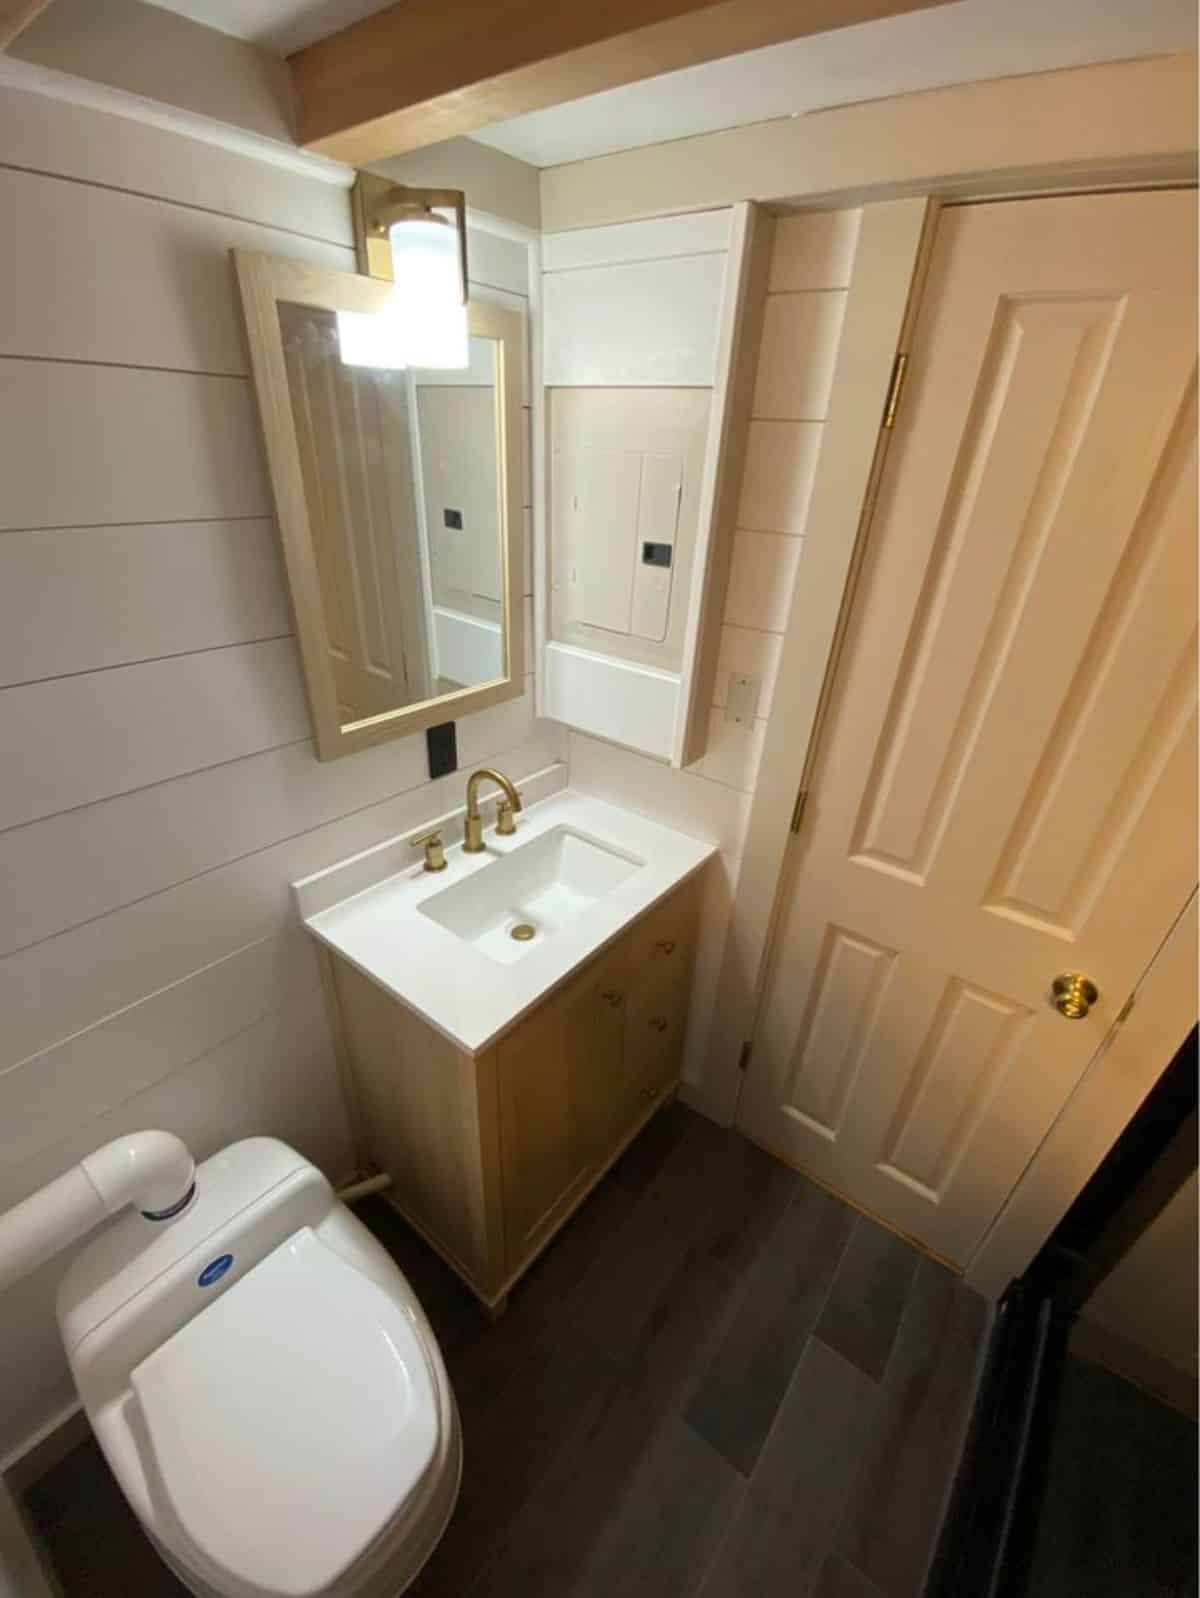 standard toilet, sink with vanity & mirror in bathroom of Cultivated Tiny Home